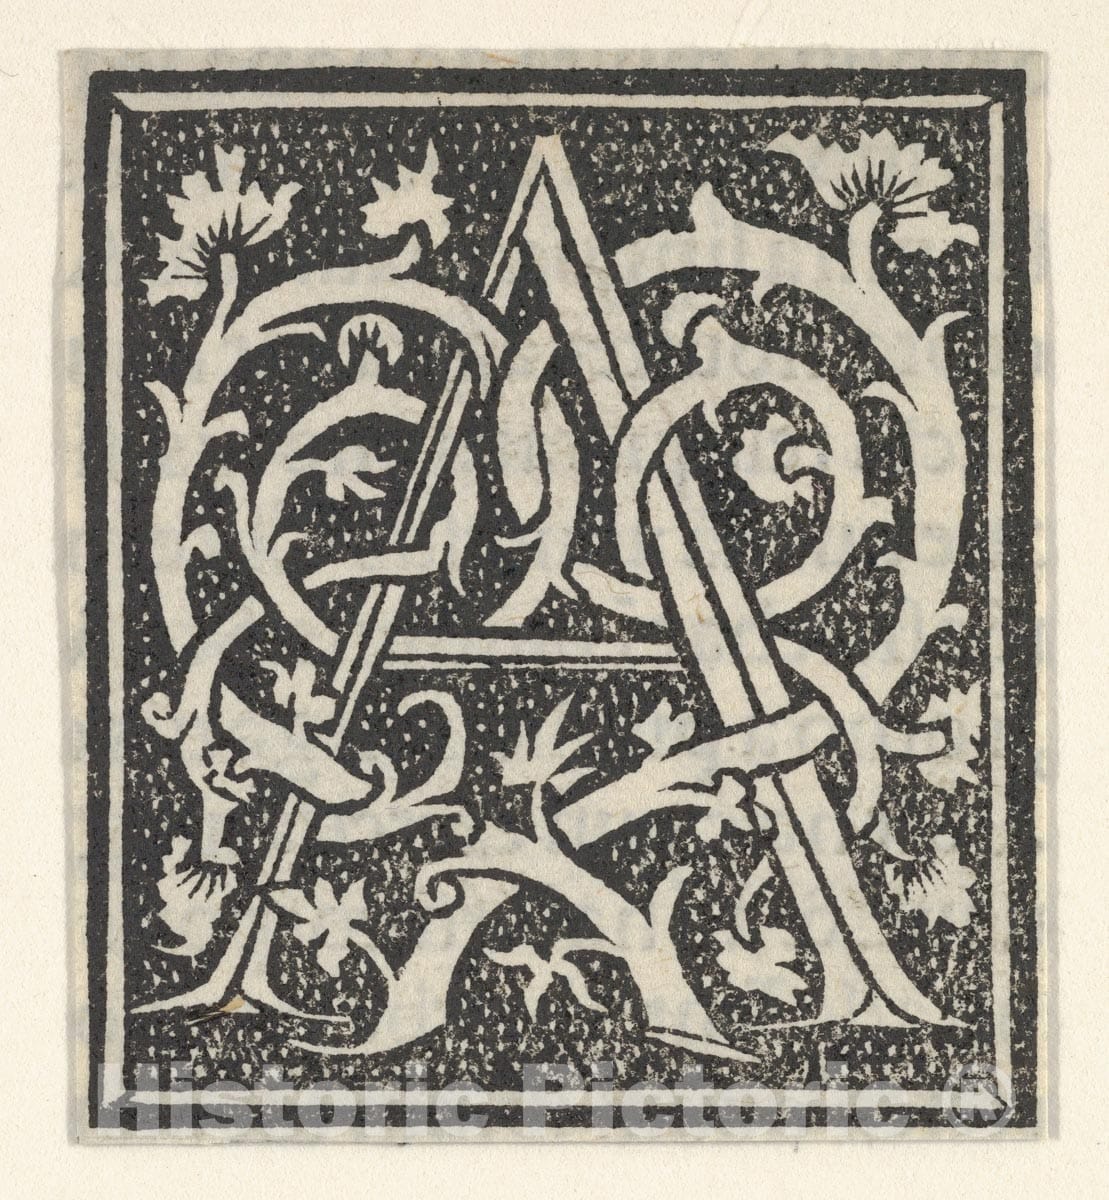 Art Print : Anonymous, Italian, 16th Century - Initial Letter A on Patterned Background : Vintage Wall Art